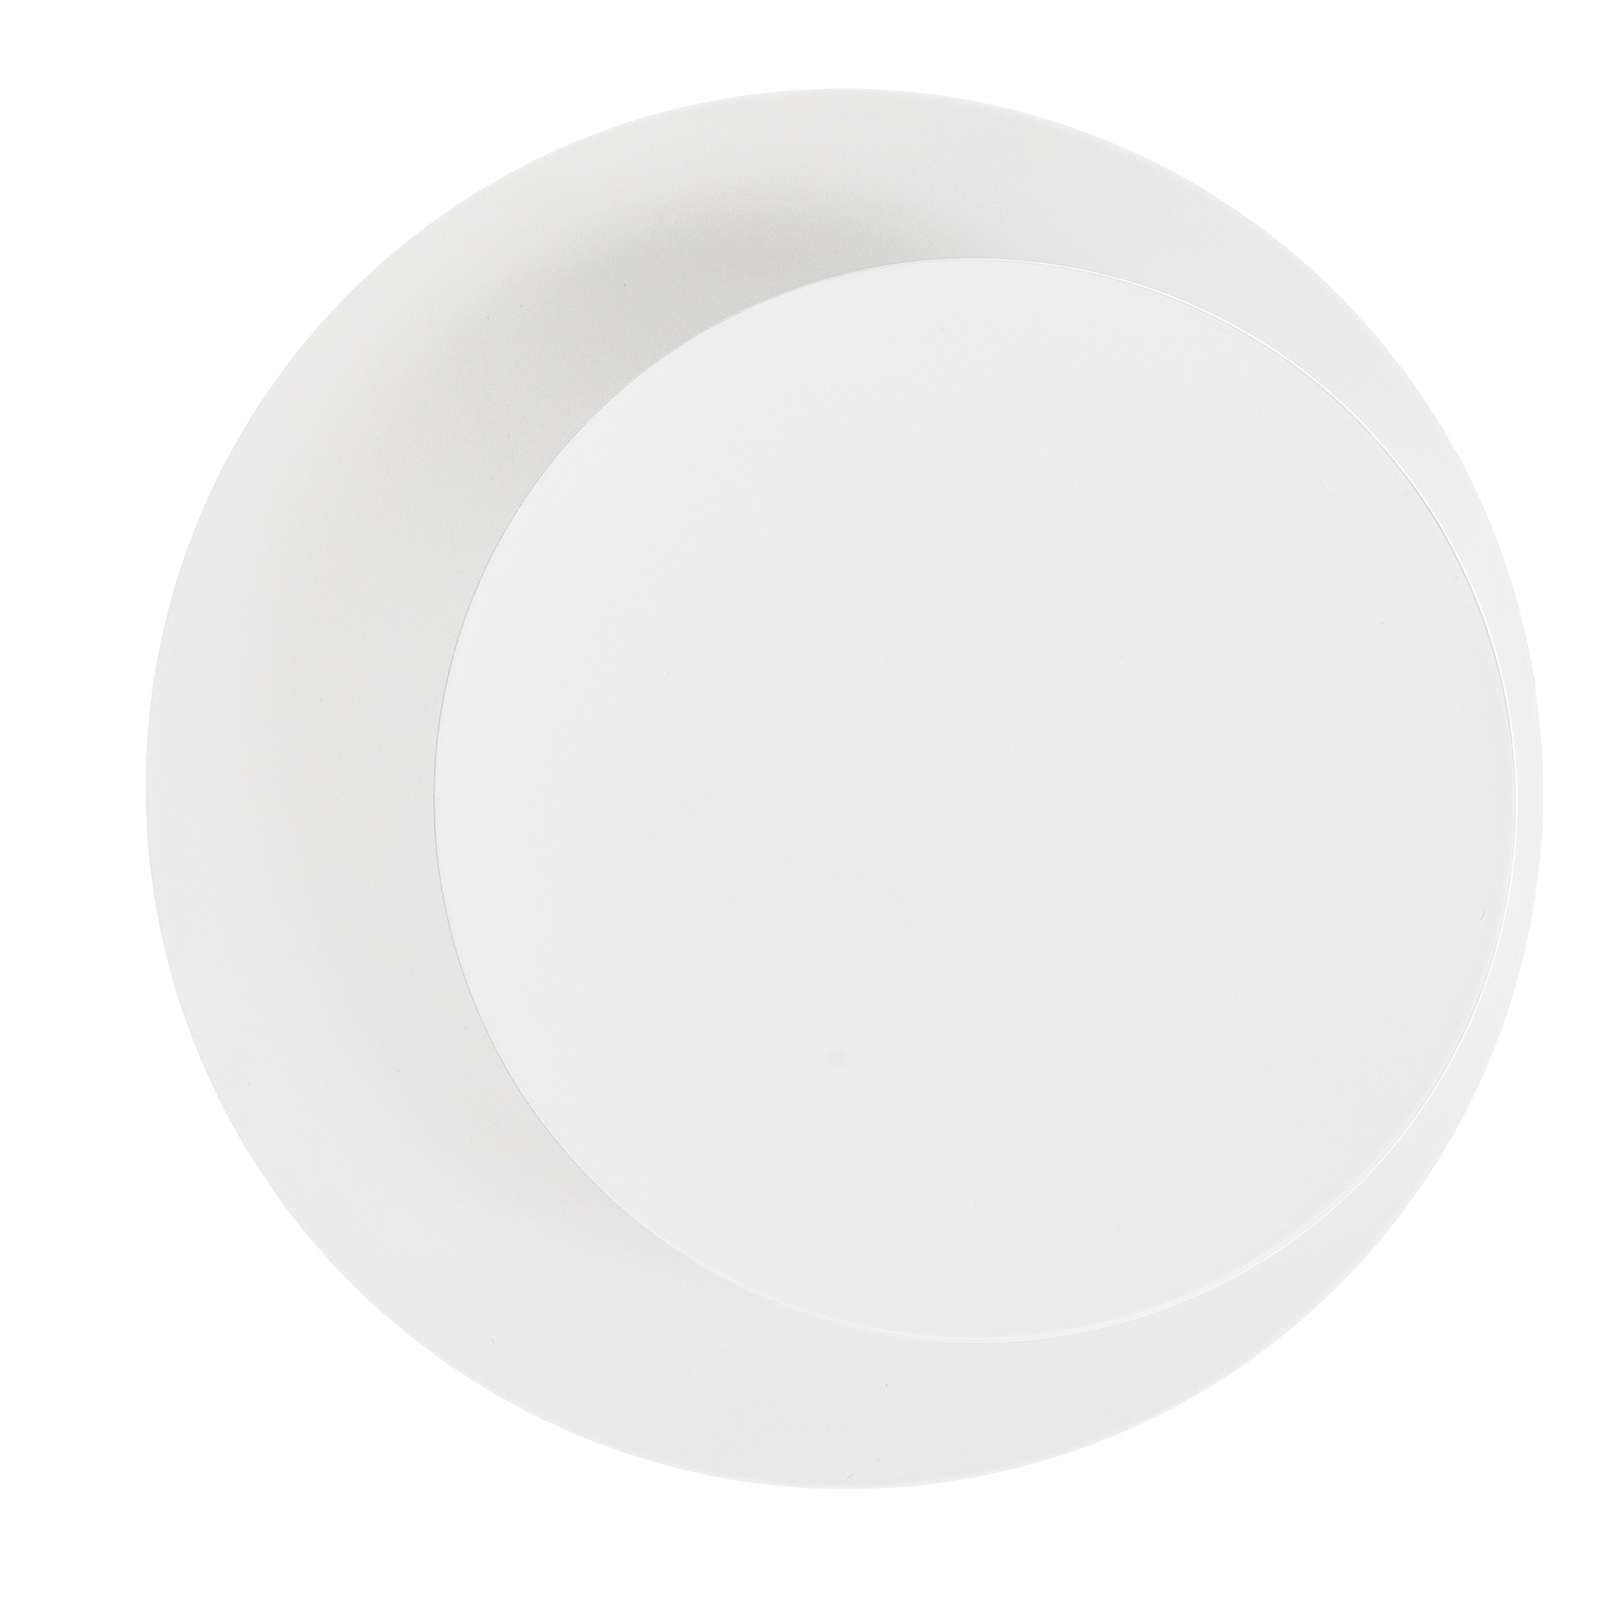 Circle wall light in a round shape, white